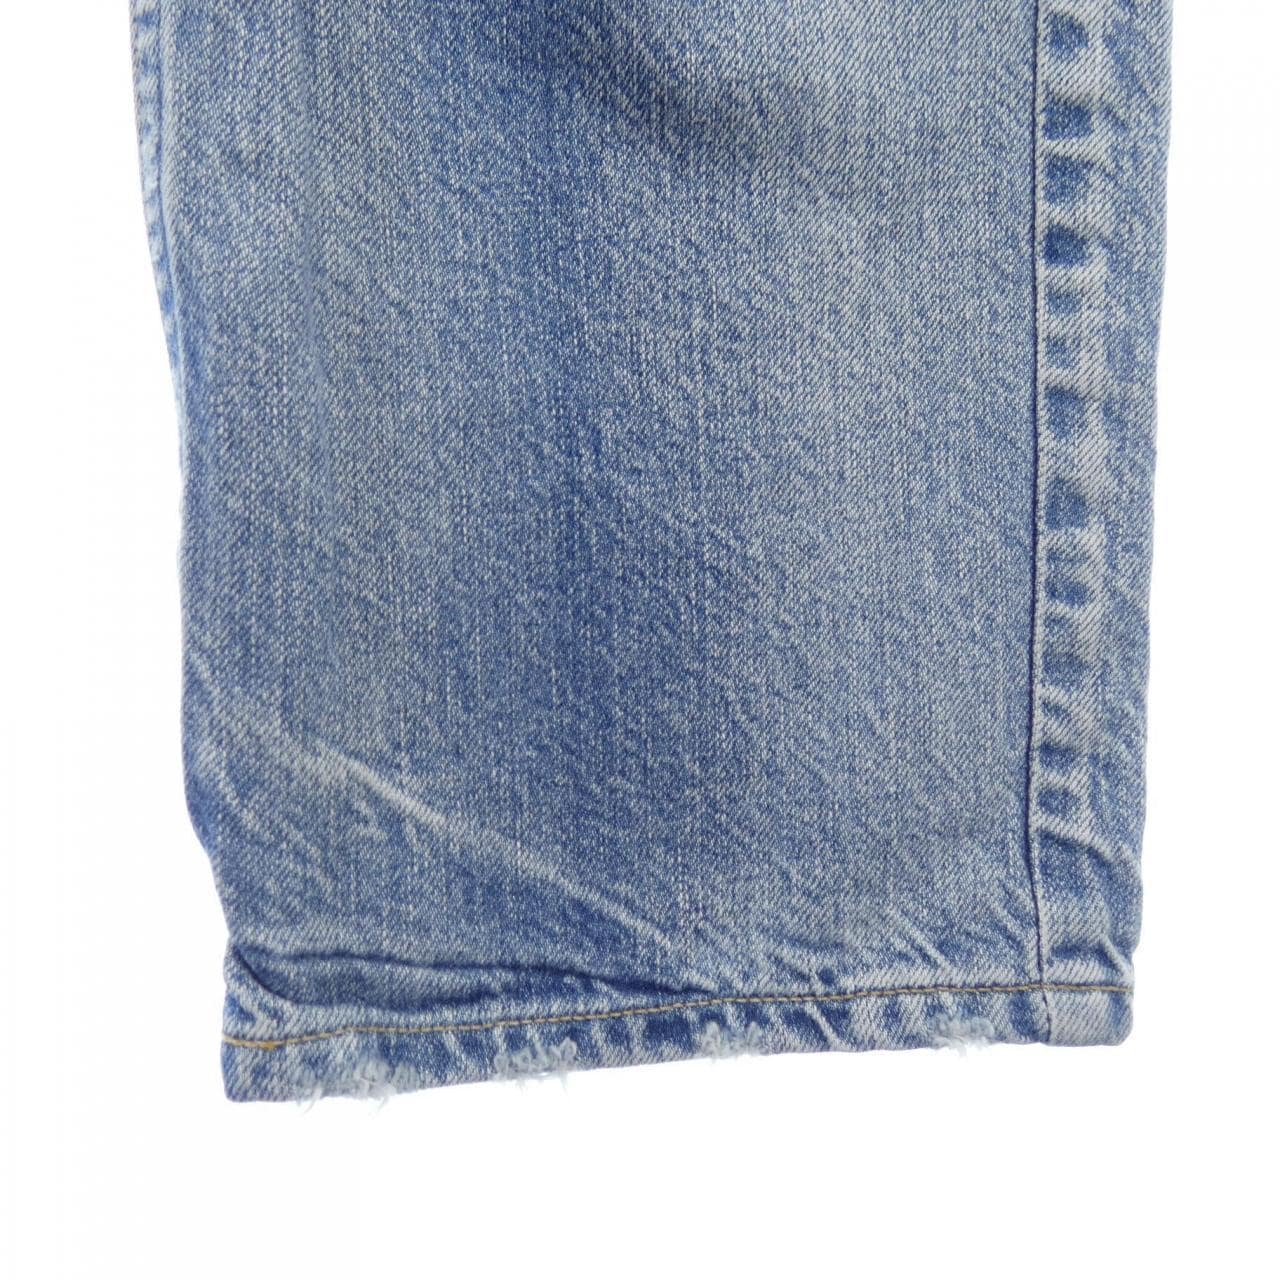 Upper heights UPPER HIGHTS jeans